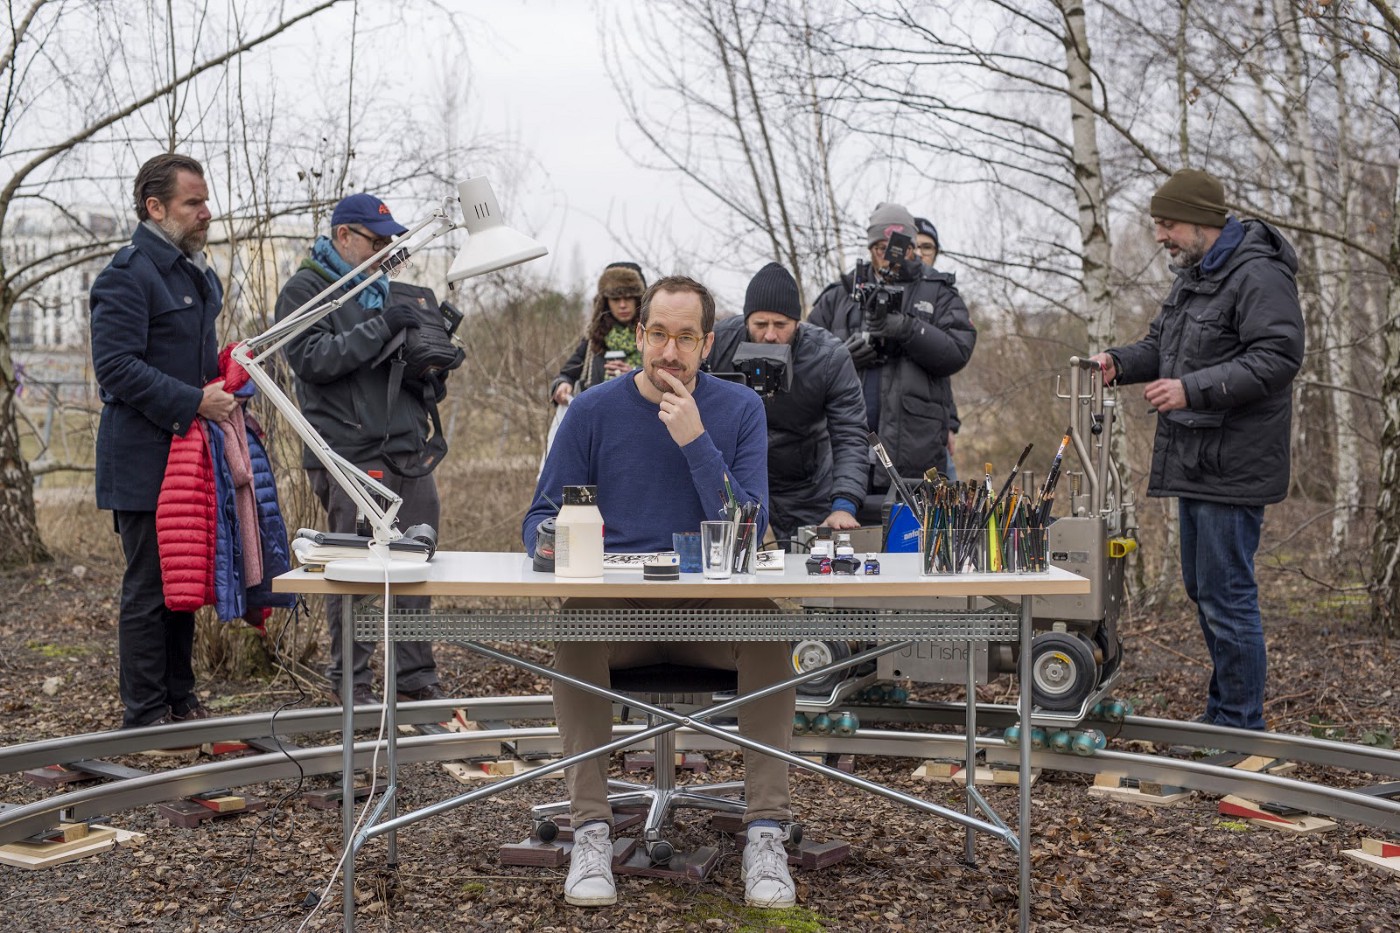 Christoph Niemann sits at a drawing desk in a Berlin park with a film crew setting up behind him.